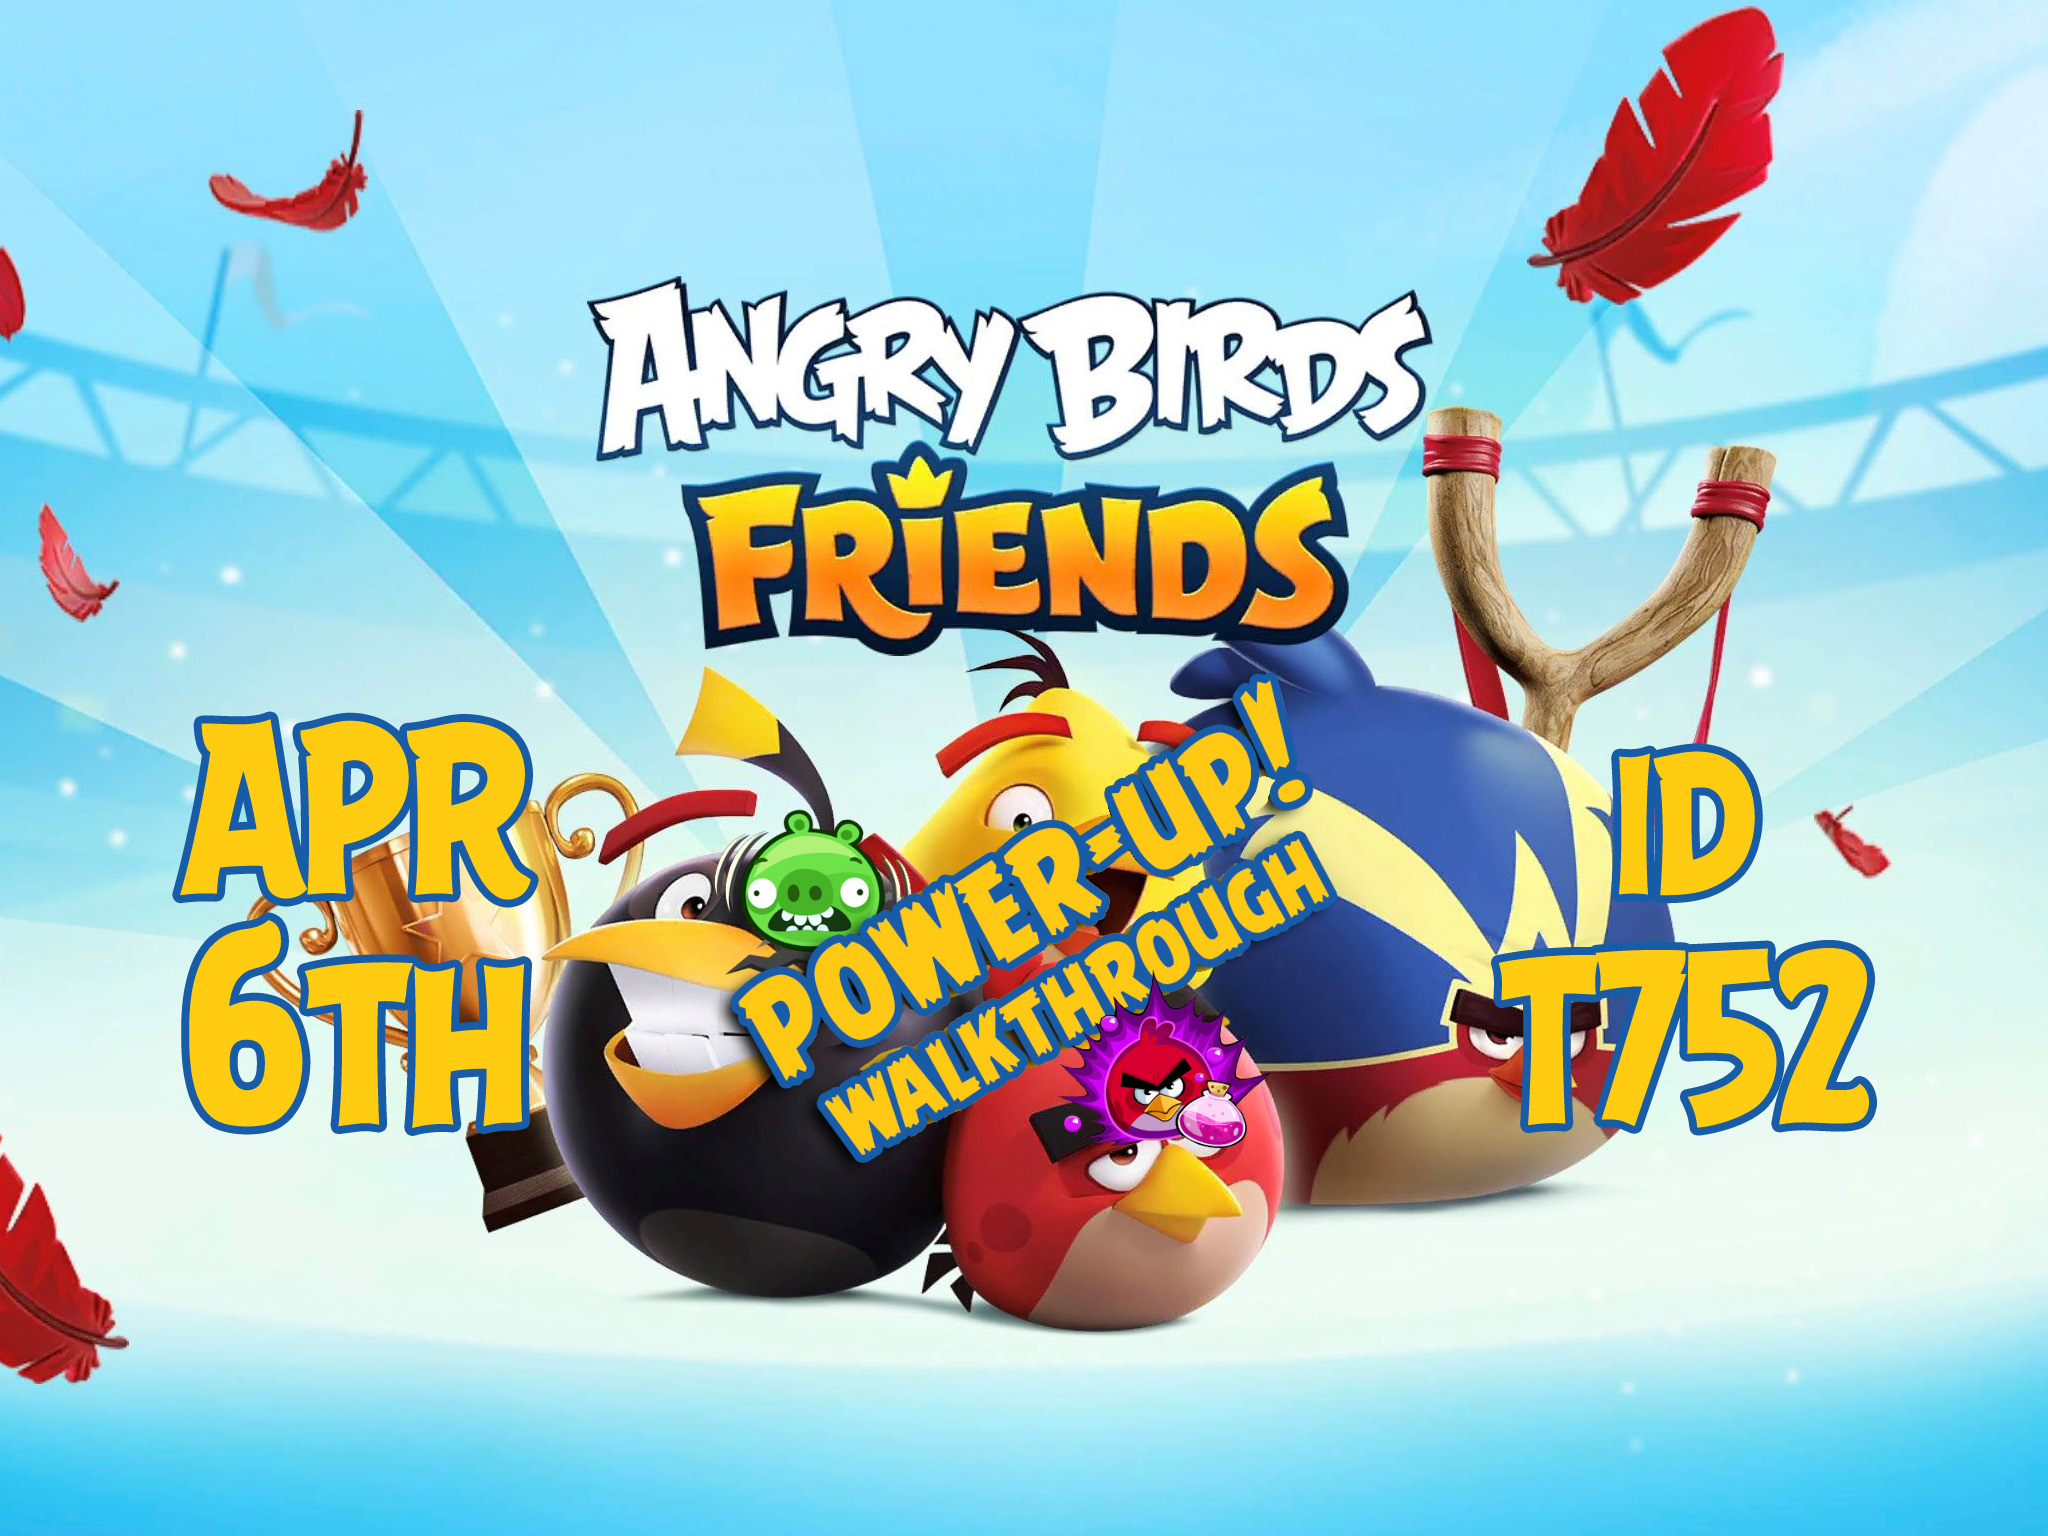 Angry-Birds-Friends-Tournament-T752-Feature-Image-PU